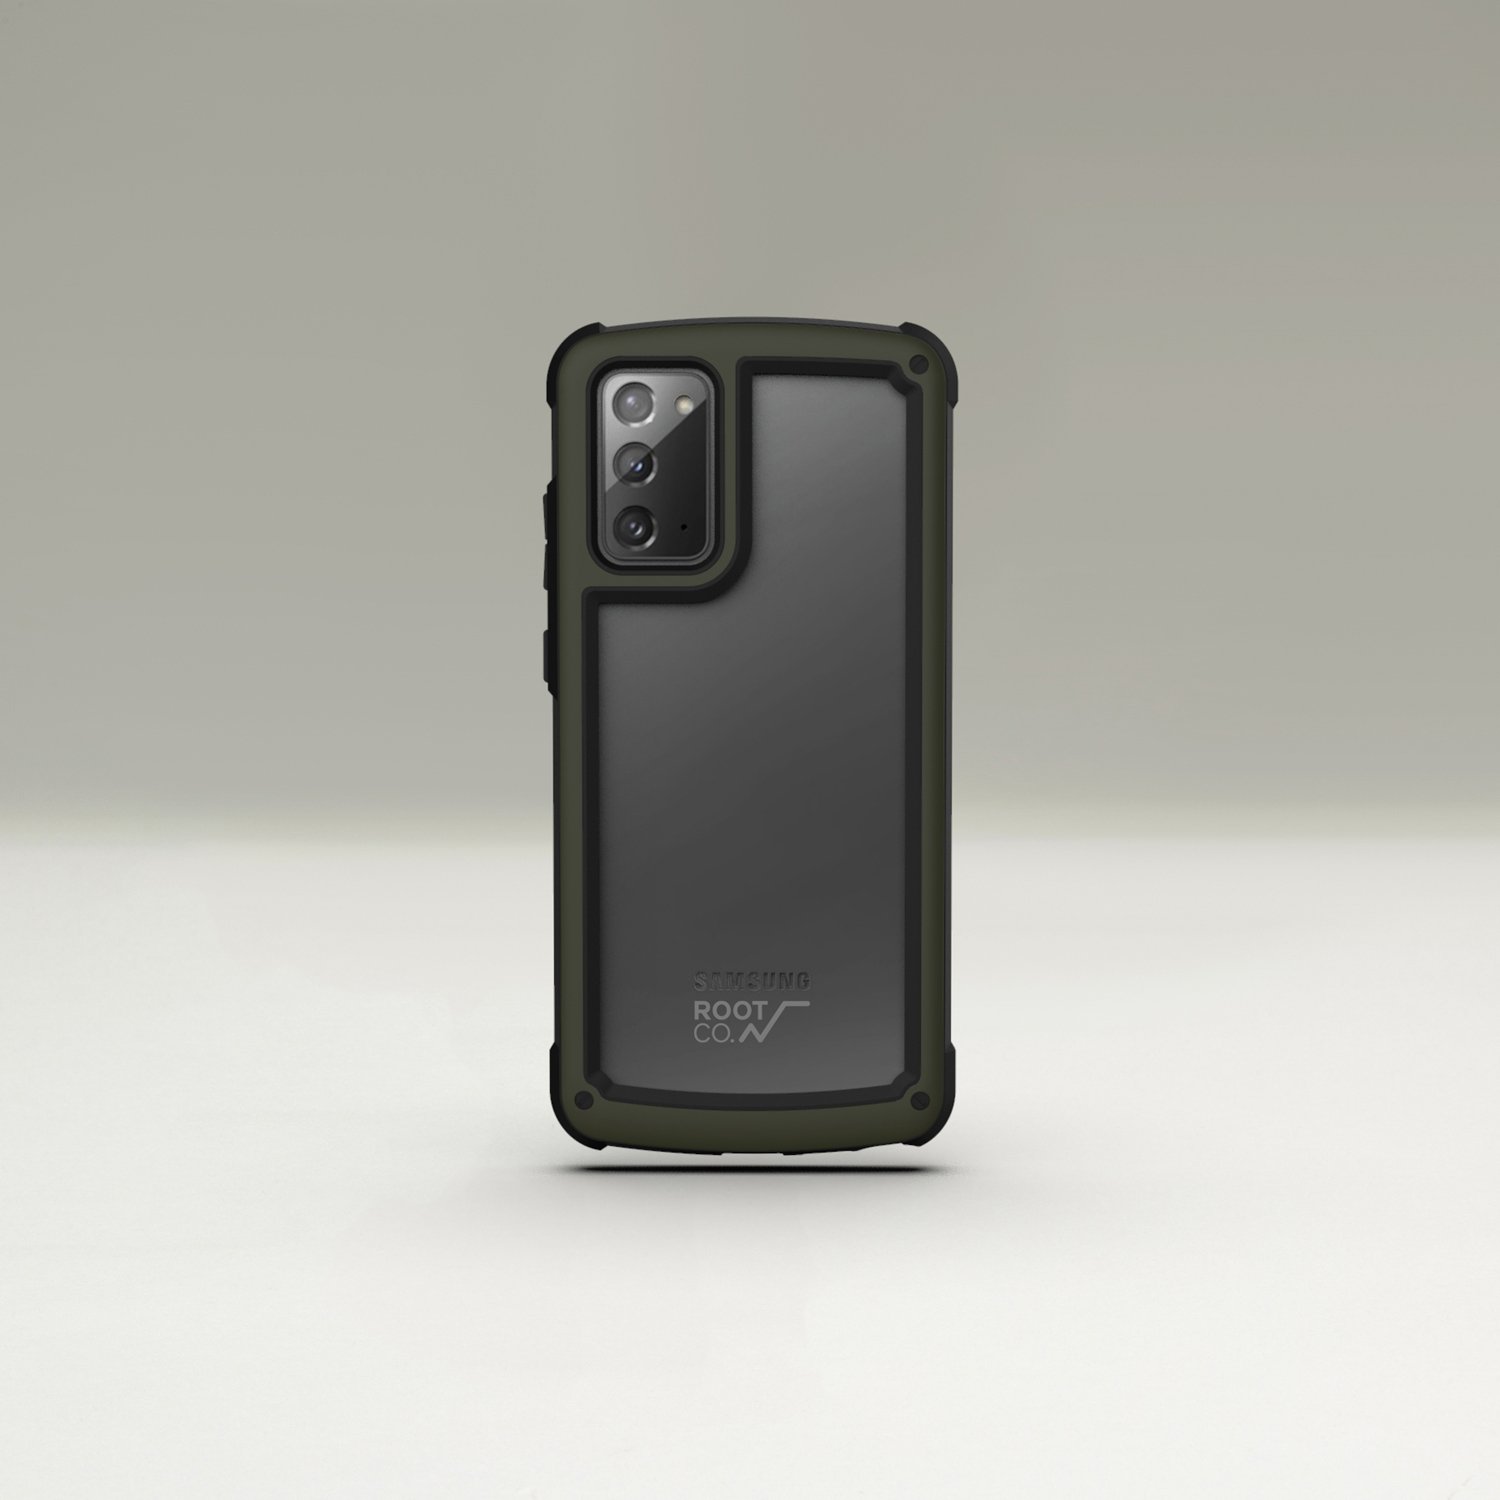 Root Co. Gravity Shock Resist Tough & Basic Case for Samsung Galaxy Note 20, Khaki Default ROOT CO. 